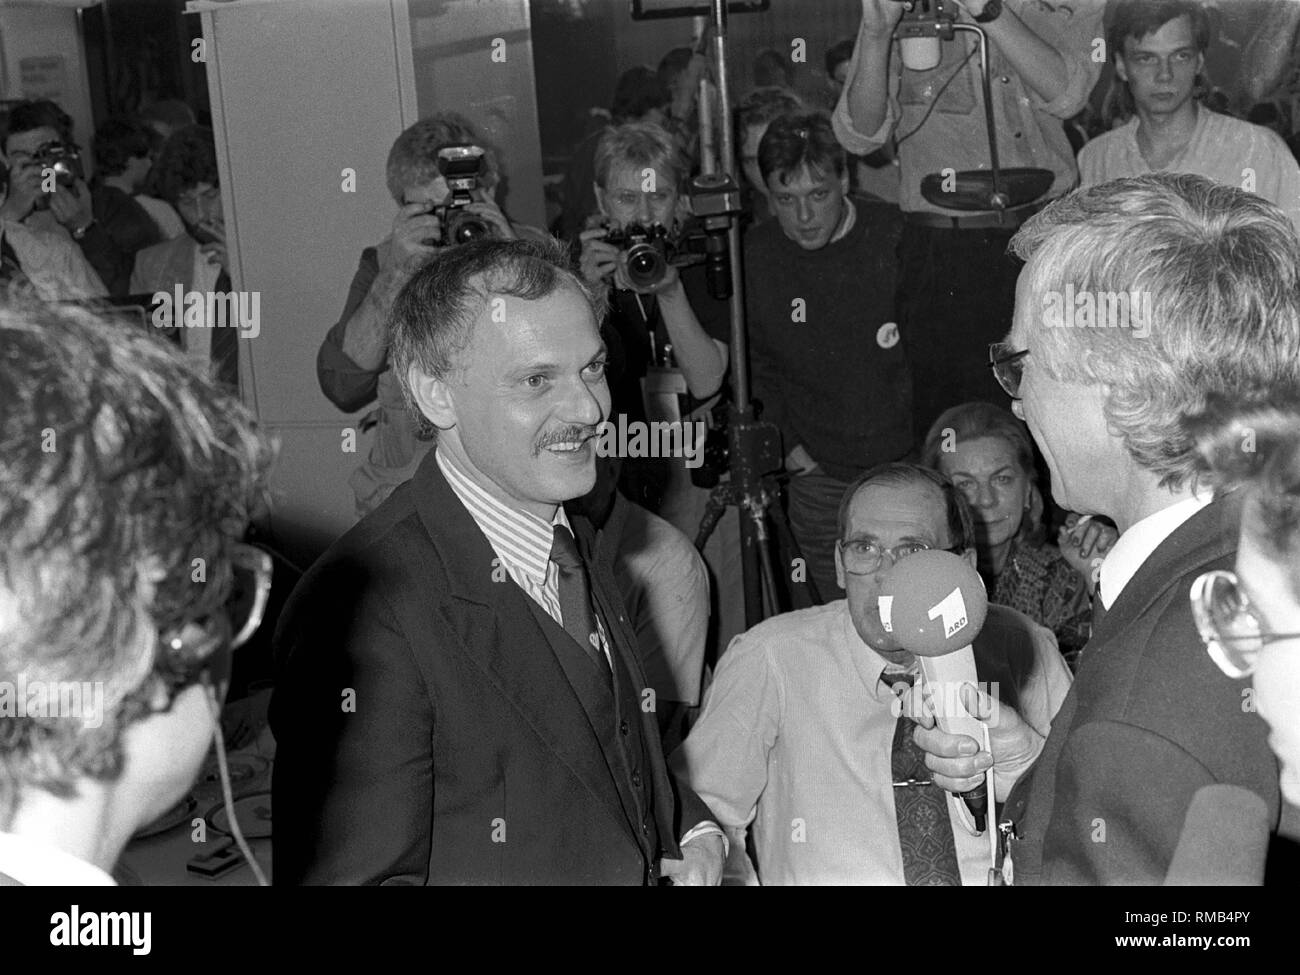 Germany, Berlin, March 18, 1990: People's Chamber election of the GDR in 1990. It is the first Democratic election in the GDR. Election event of the SPD in the Saalbau (roofed hall) in Friedrichshain: Ibraim Boehme is coming. Stock Photo